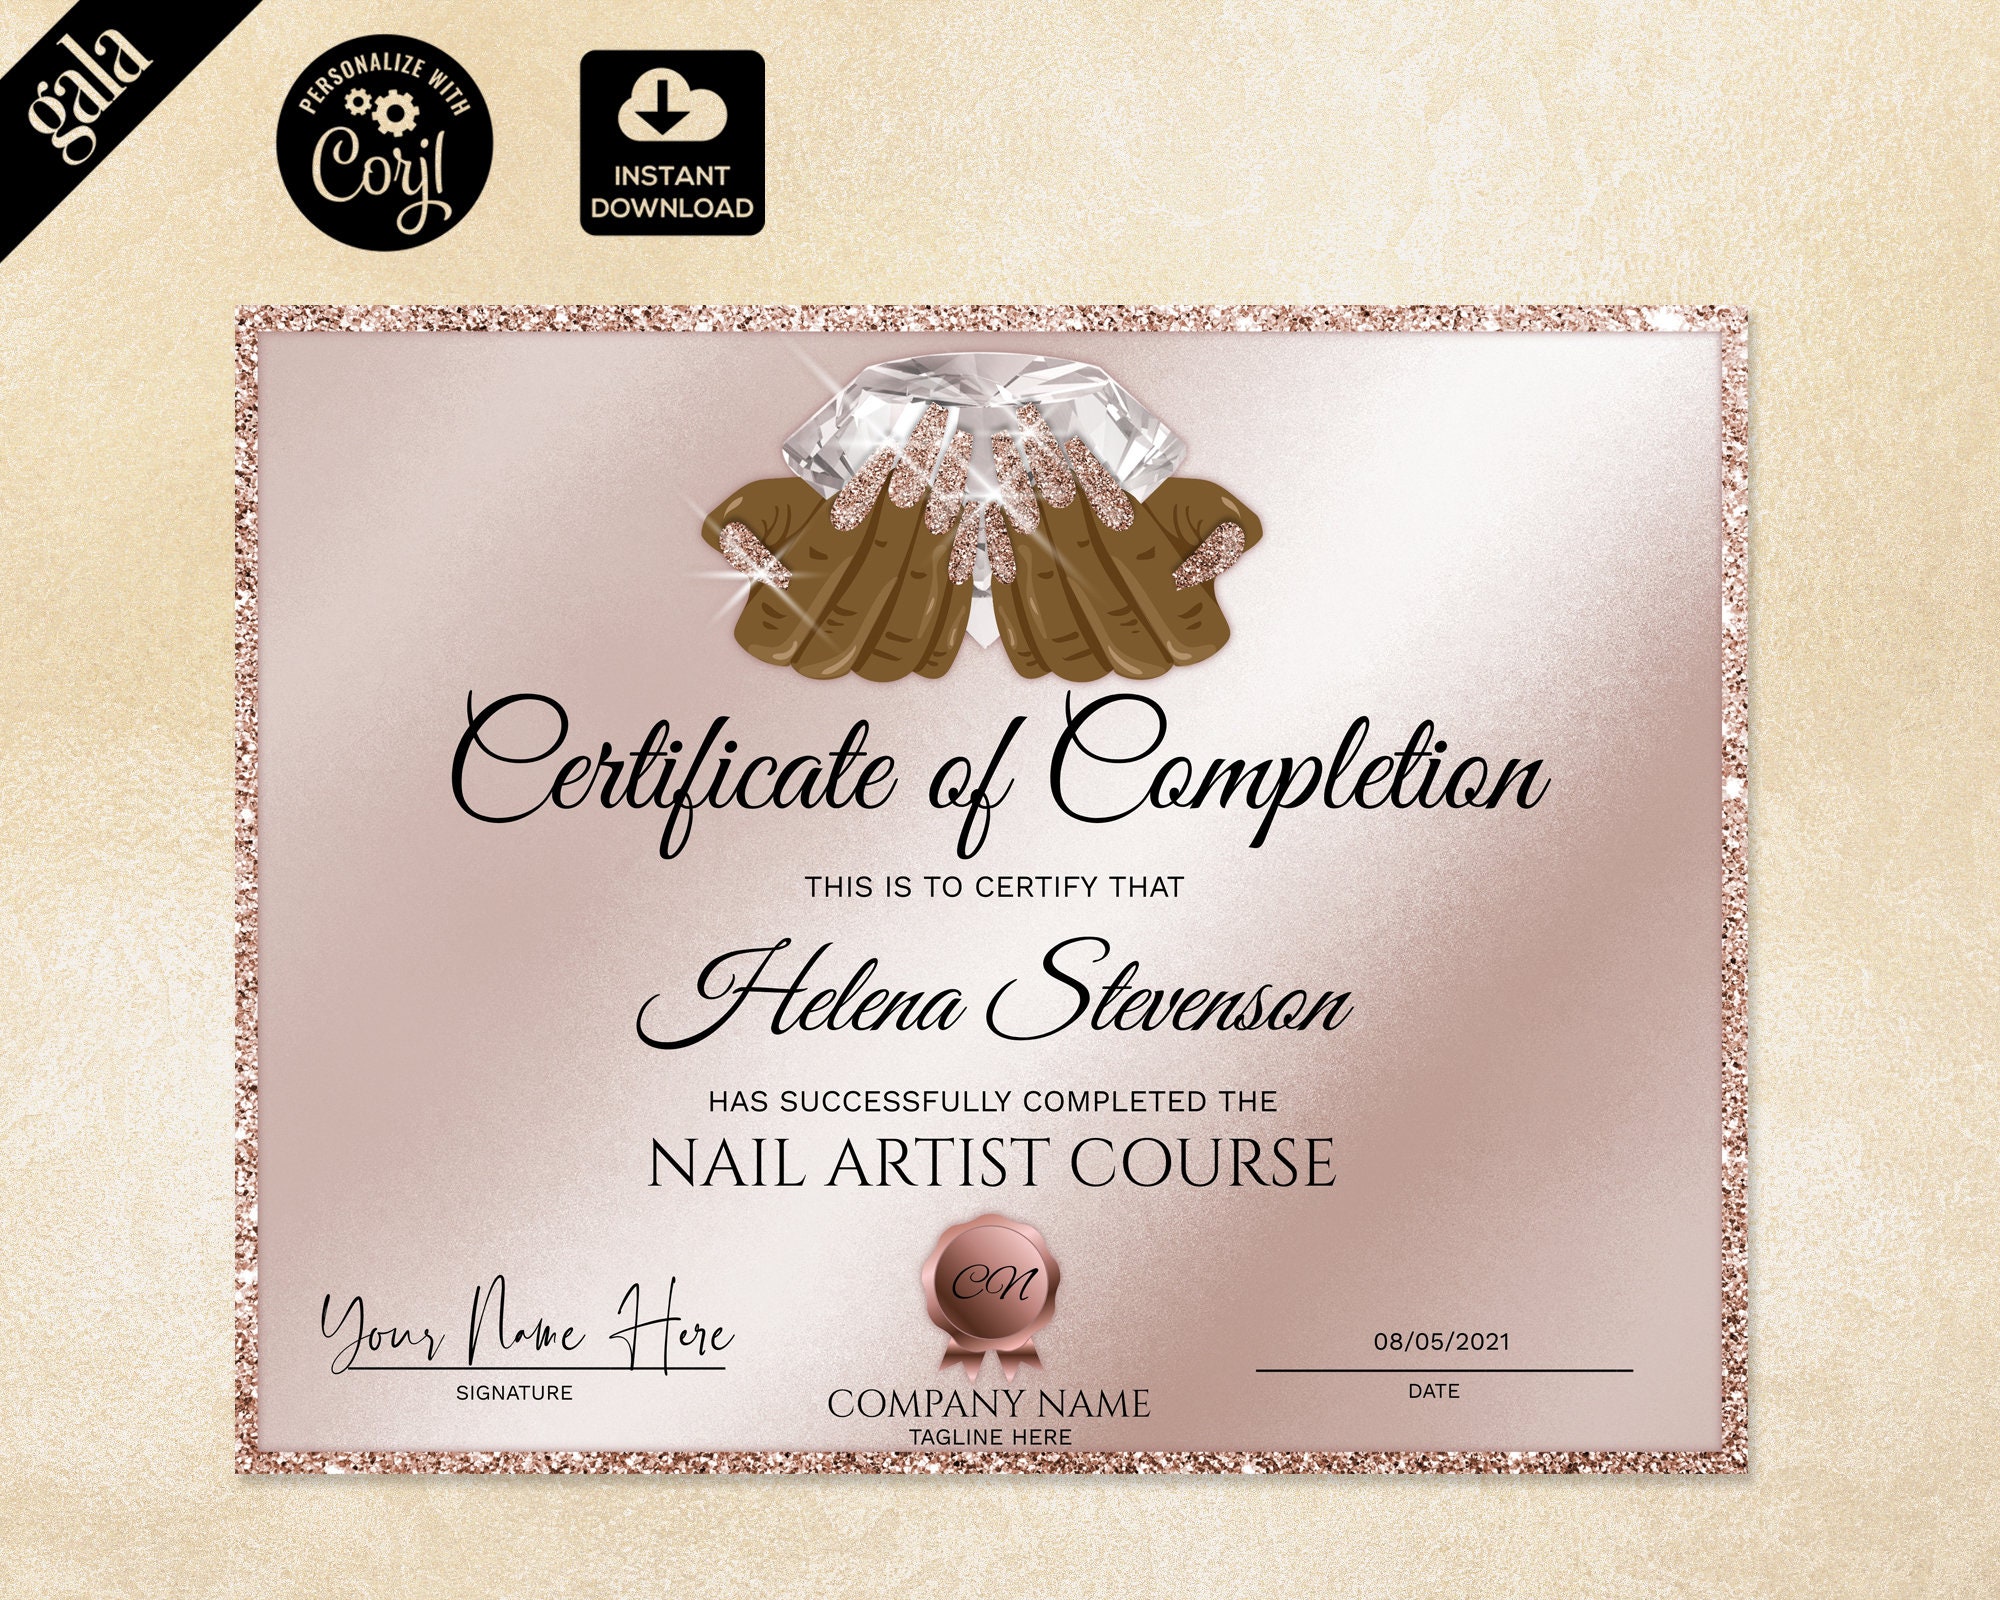 6. Nails & Beauty Academy - Nail Art Certification - wide 10